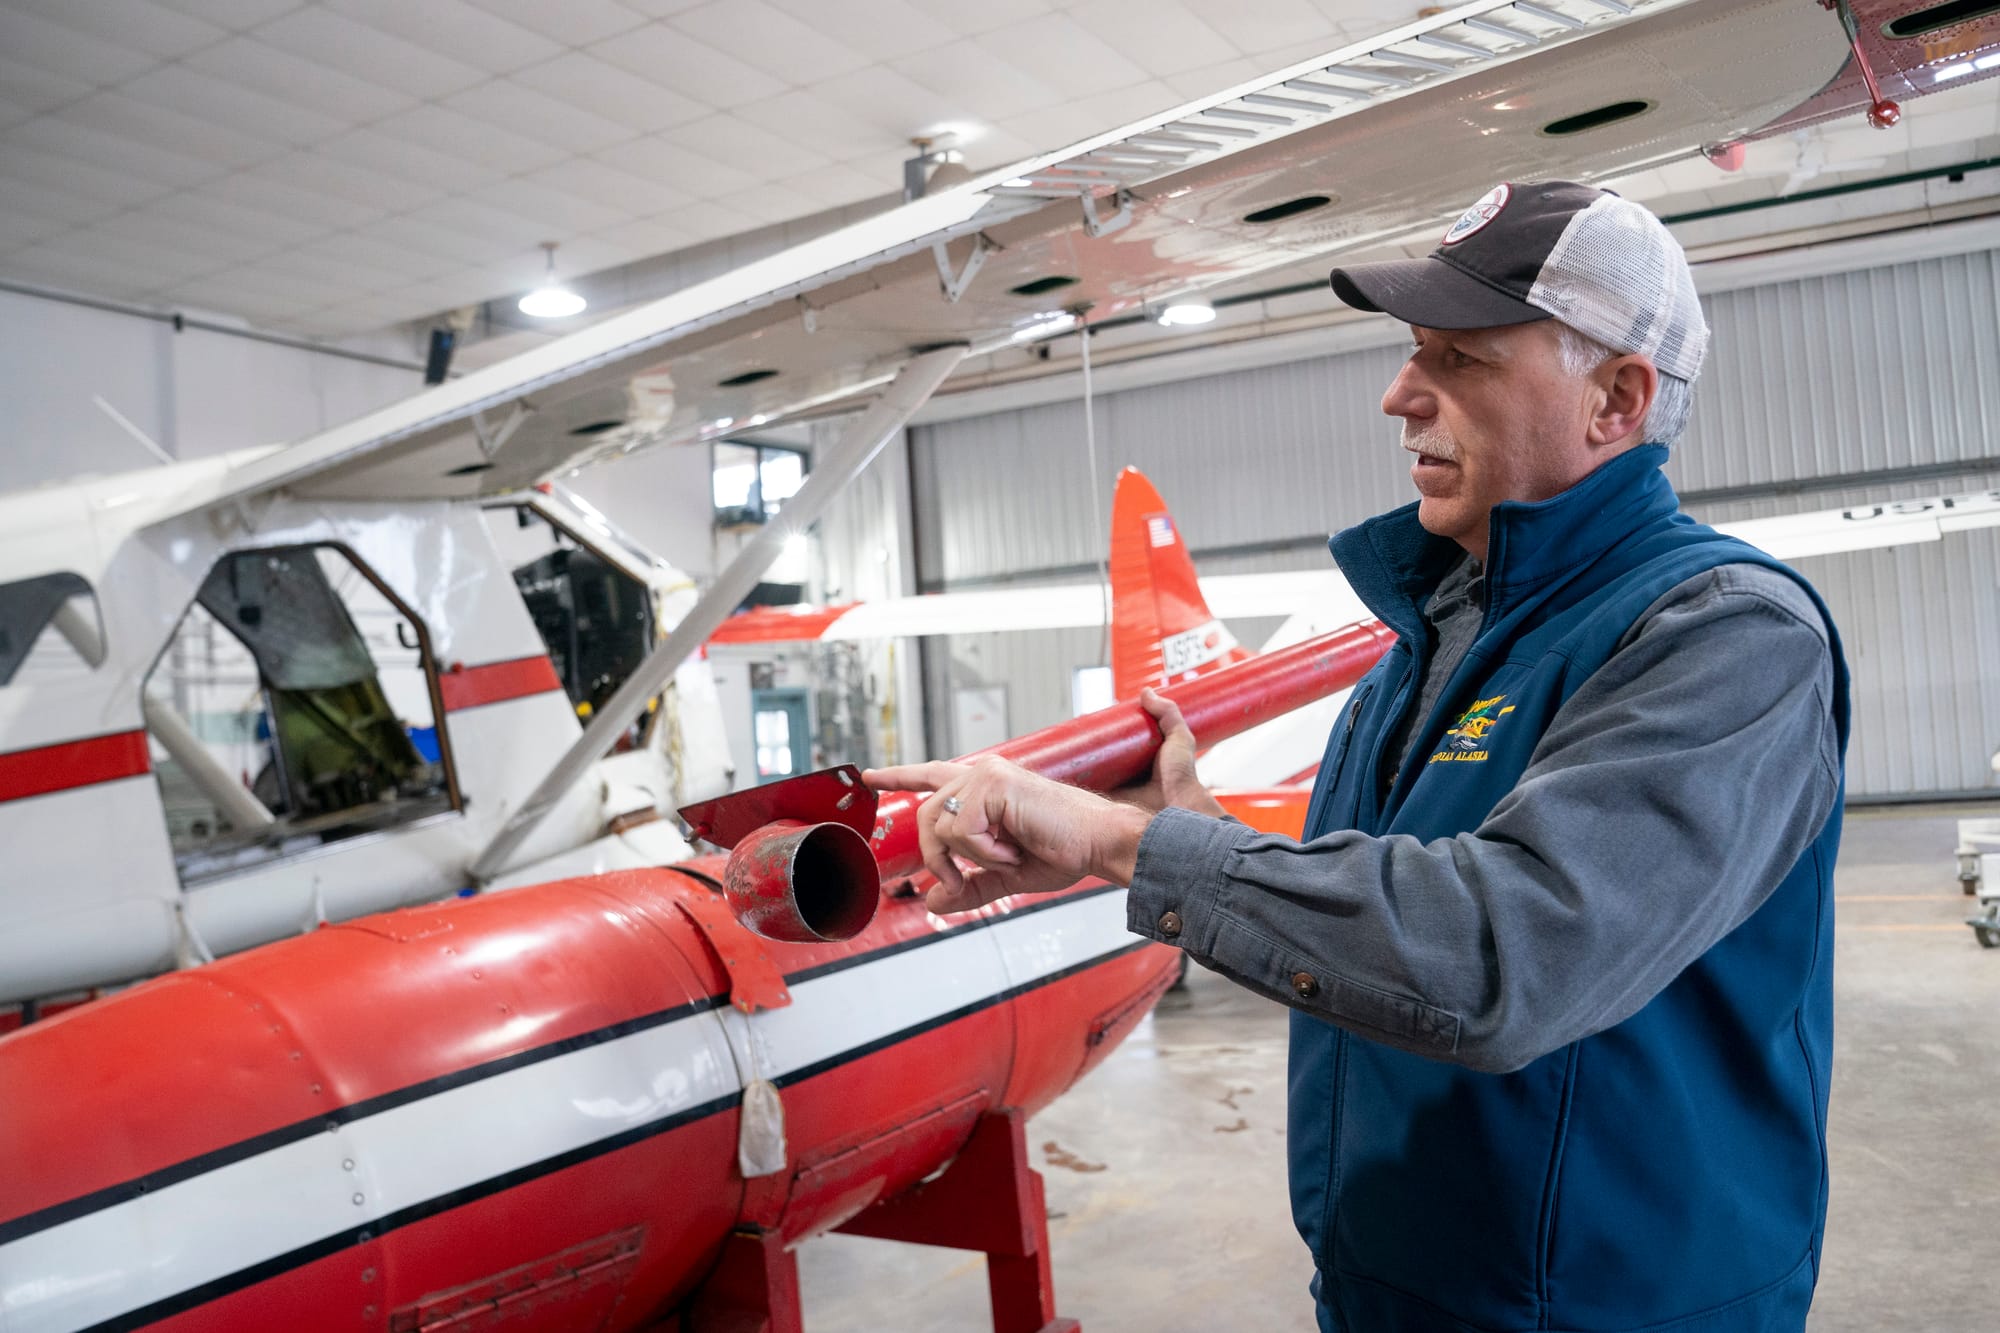 Seaplanes have patrolled northern Minnesota forests for nearly a century. They're ready for this fire season